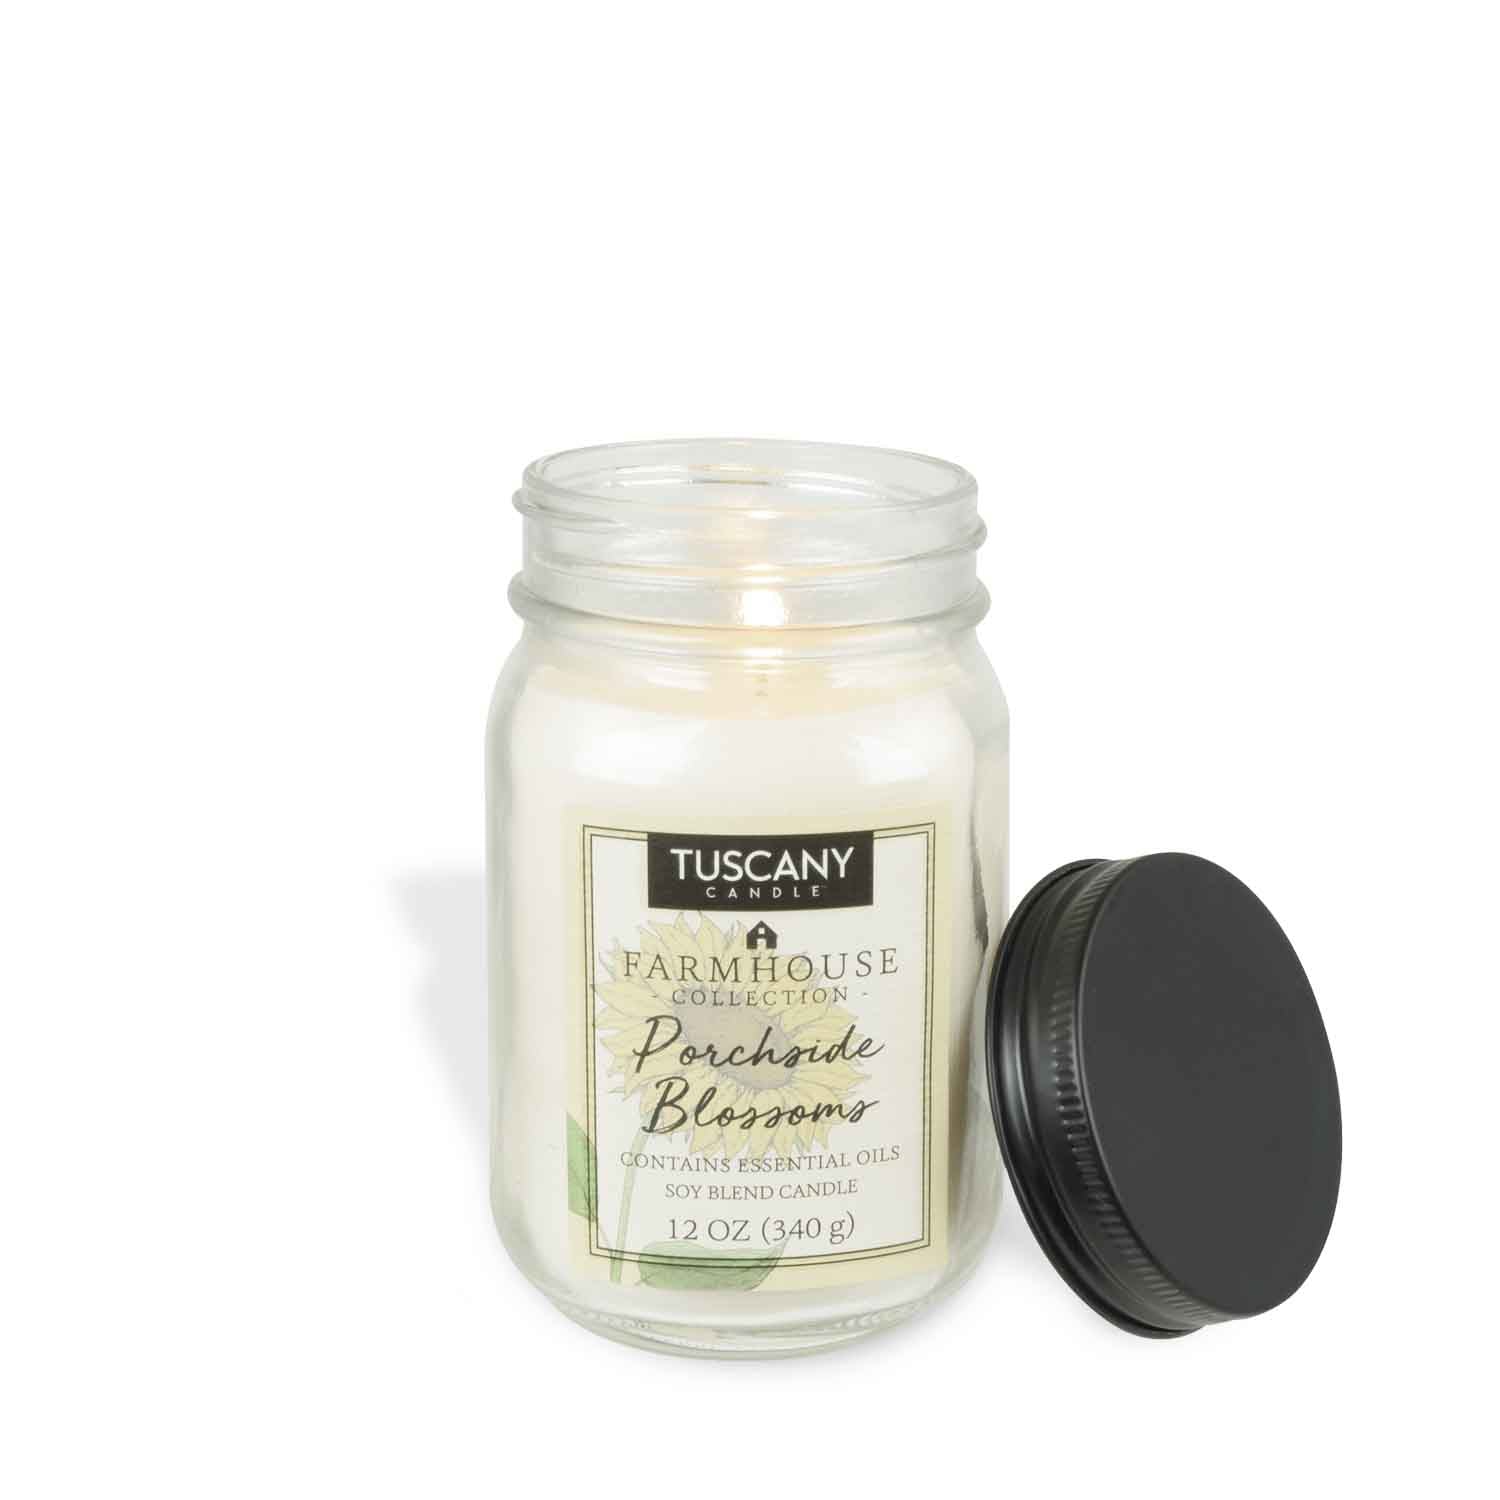 A Porchside Blossoms Scented Jar Candle (12 oz) from the Tuscany Candle® EVD Farmhouse Collection.